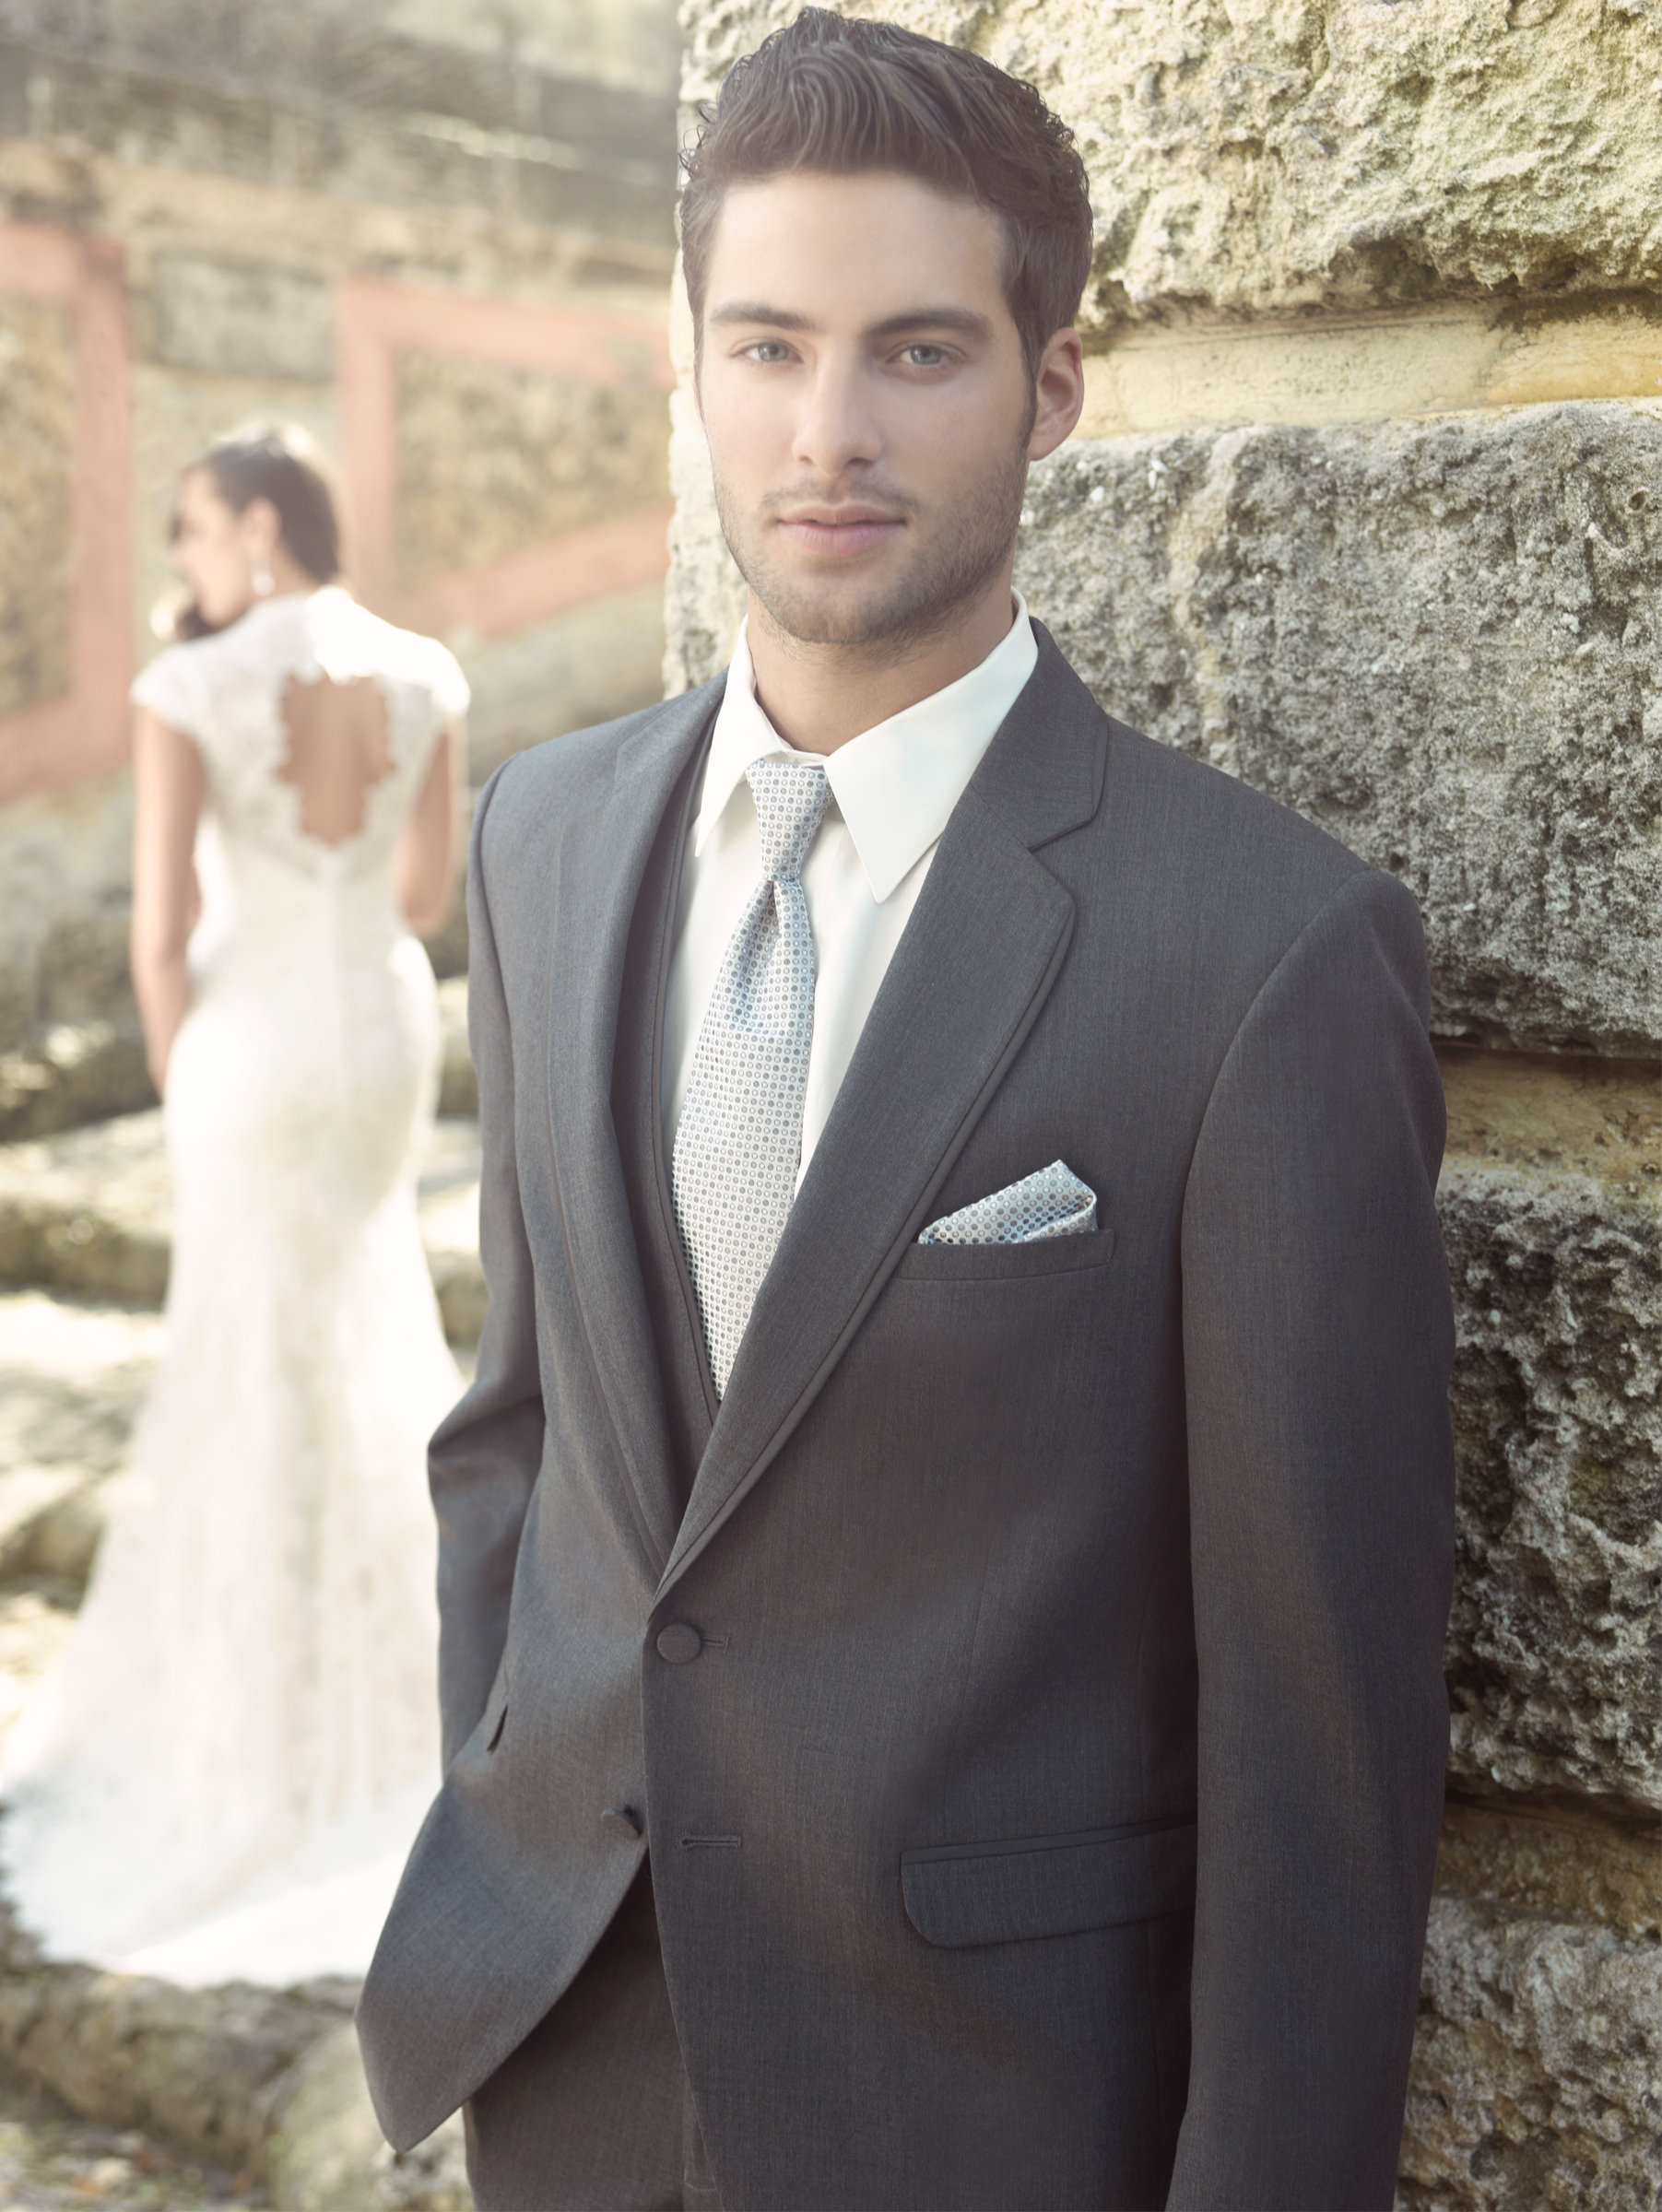 wedding-dress-luxurious-wedding-suits-san-francisco-stunning-wedding-suits-sale-awesome-pictures-of-wedding-suits-design-styles-summer-wedding-suits-2012-wedding-suits-peterborough-wedding